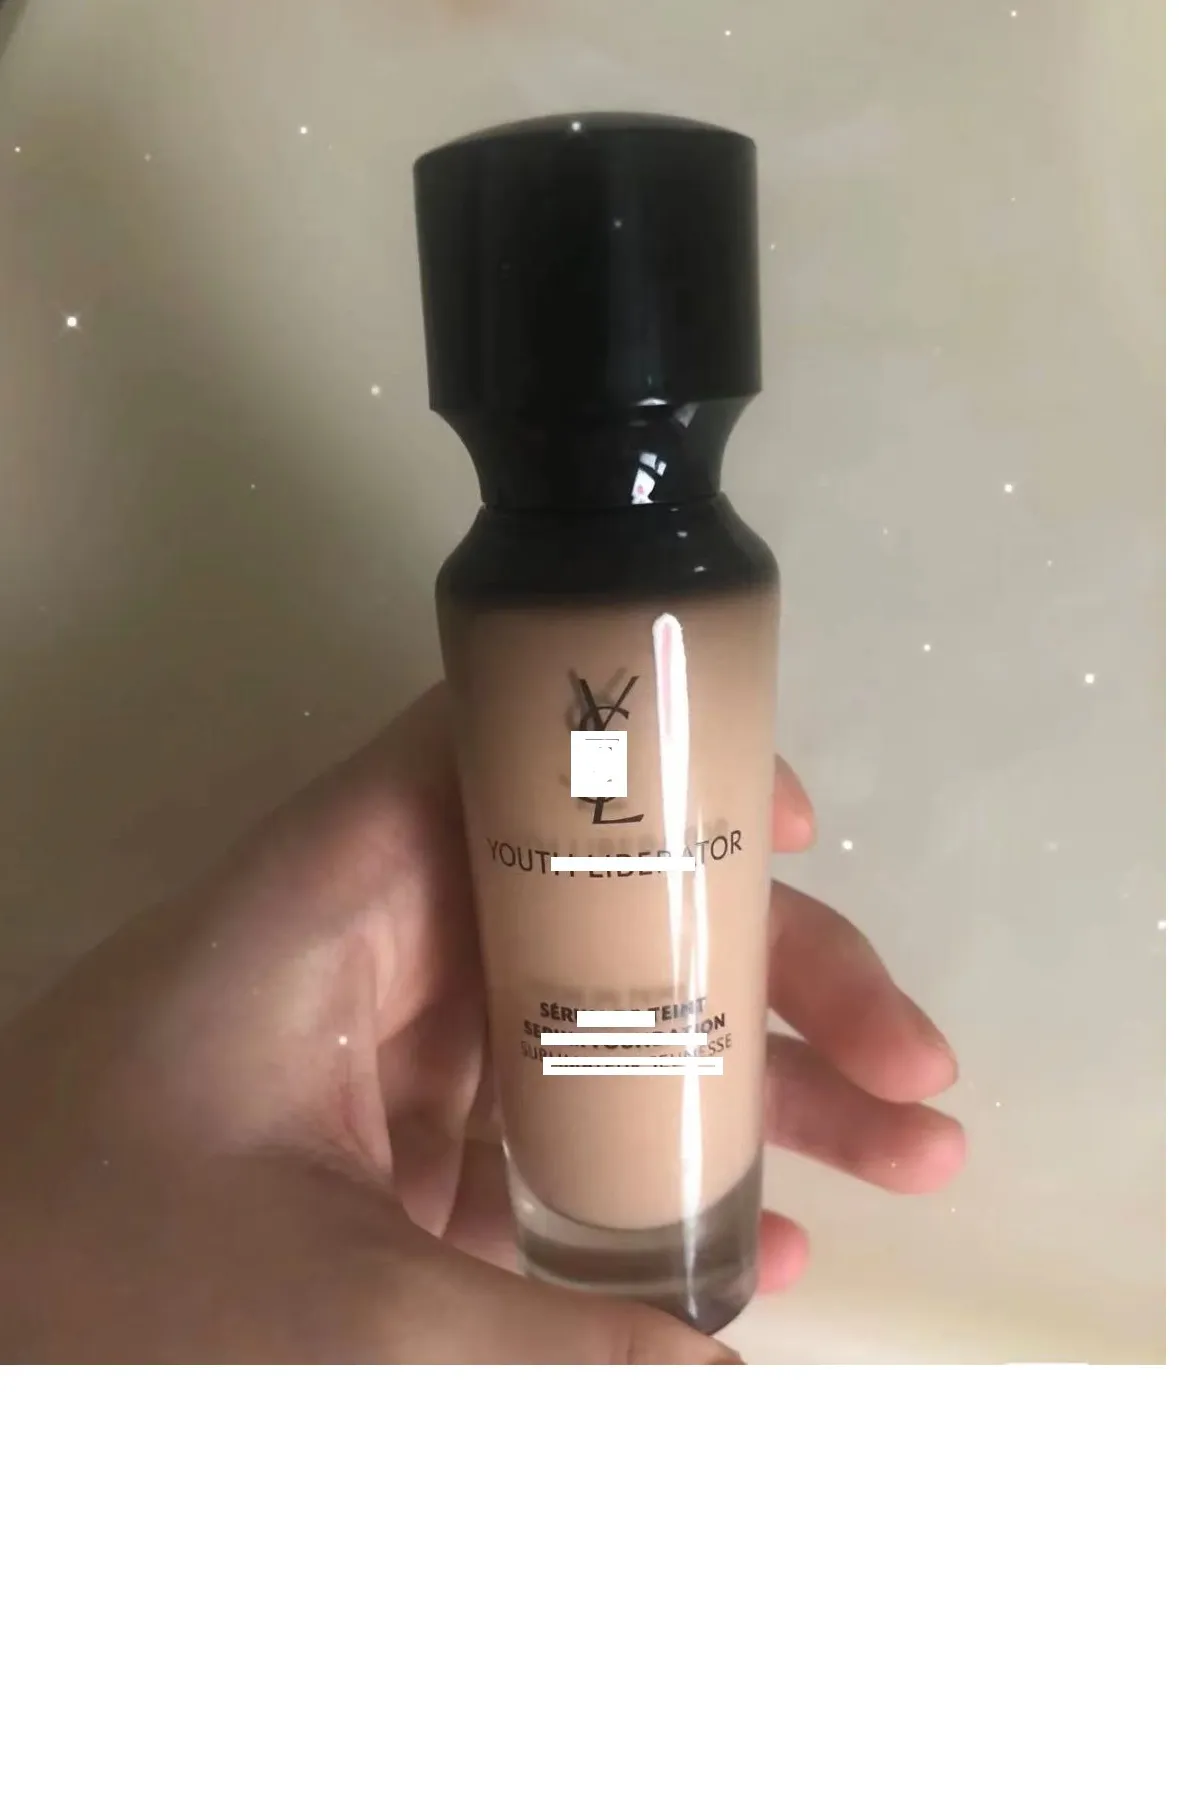 goddess foundation light and moisturizing delicate concealer brightening and correcting dullness